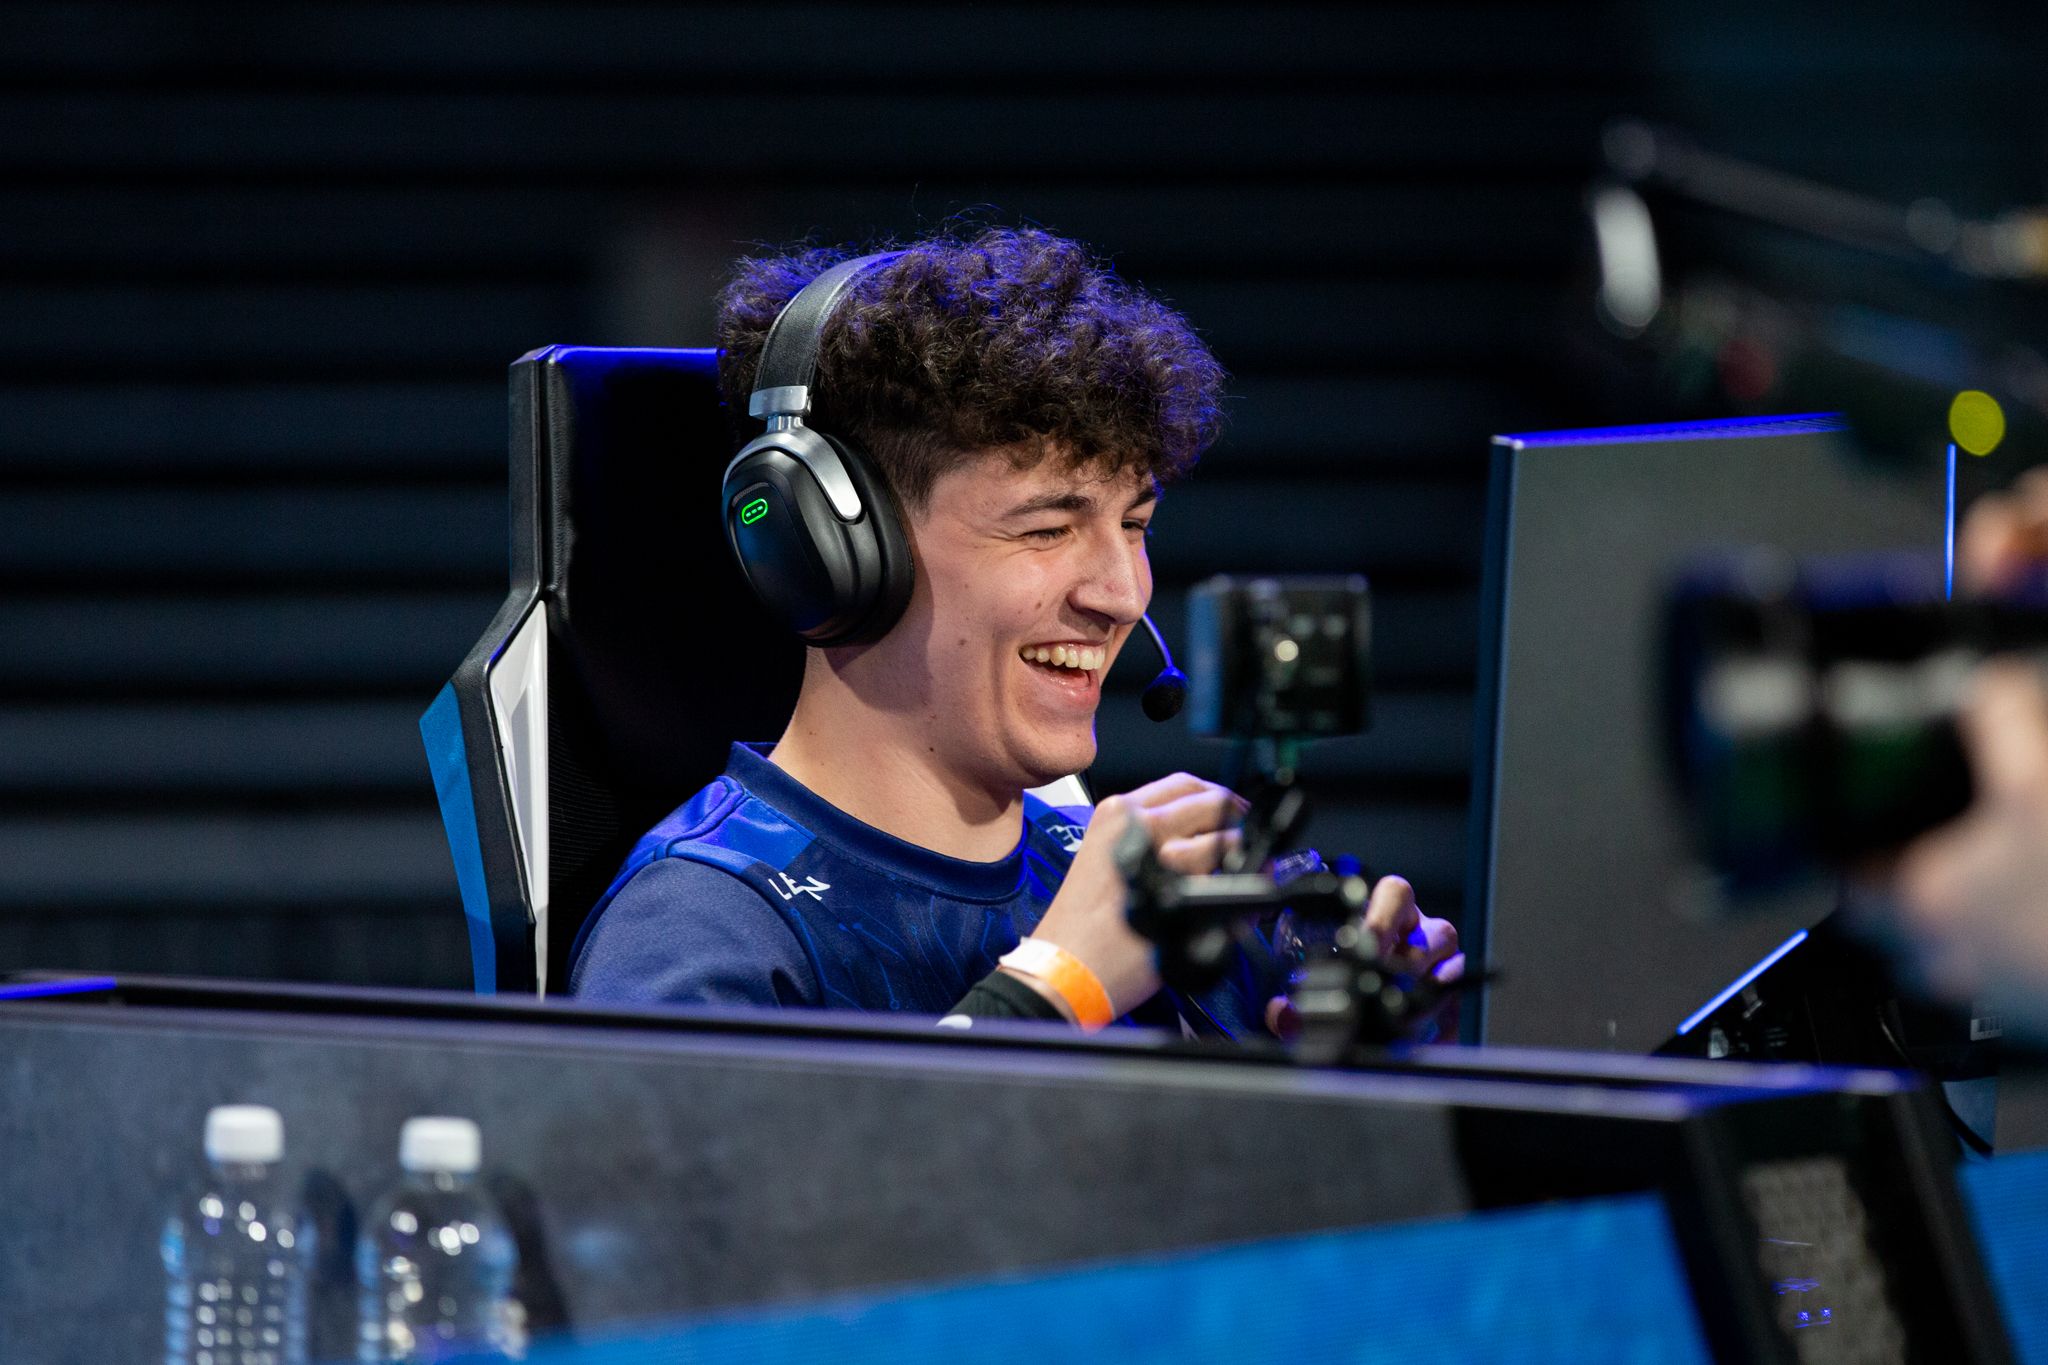 All-Star 2019] Jordan Grey Corby talks about the import player situation  in CBLoL and his experience coaching Flamengo eSports - Inven Global